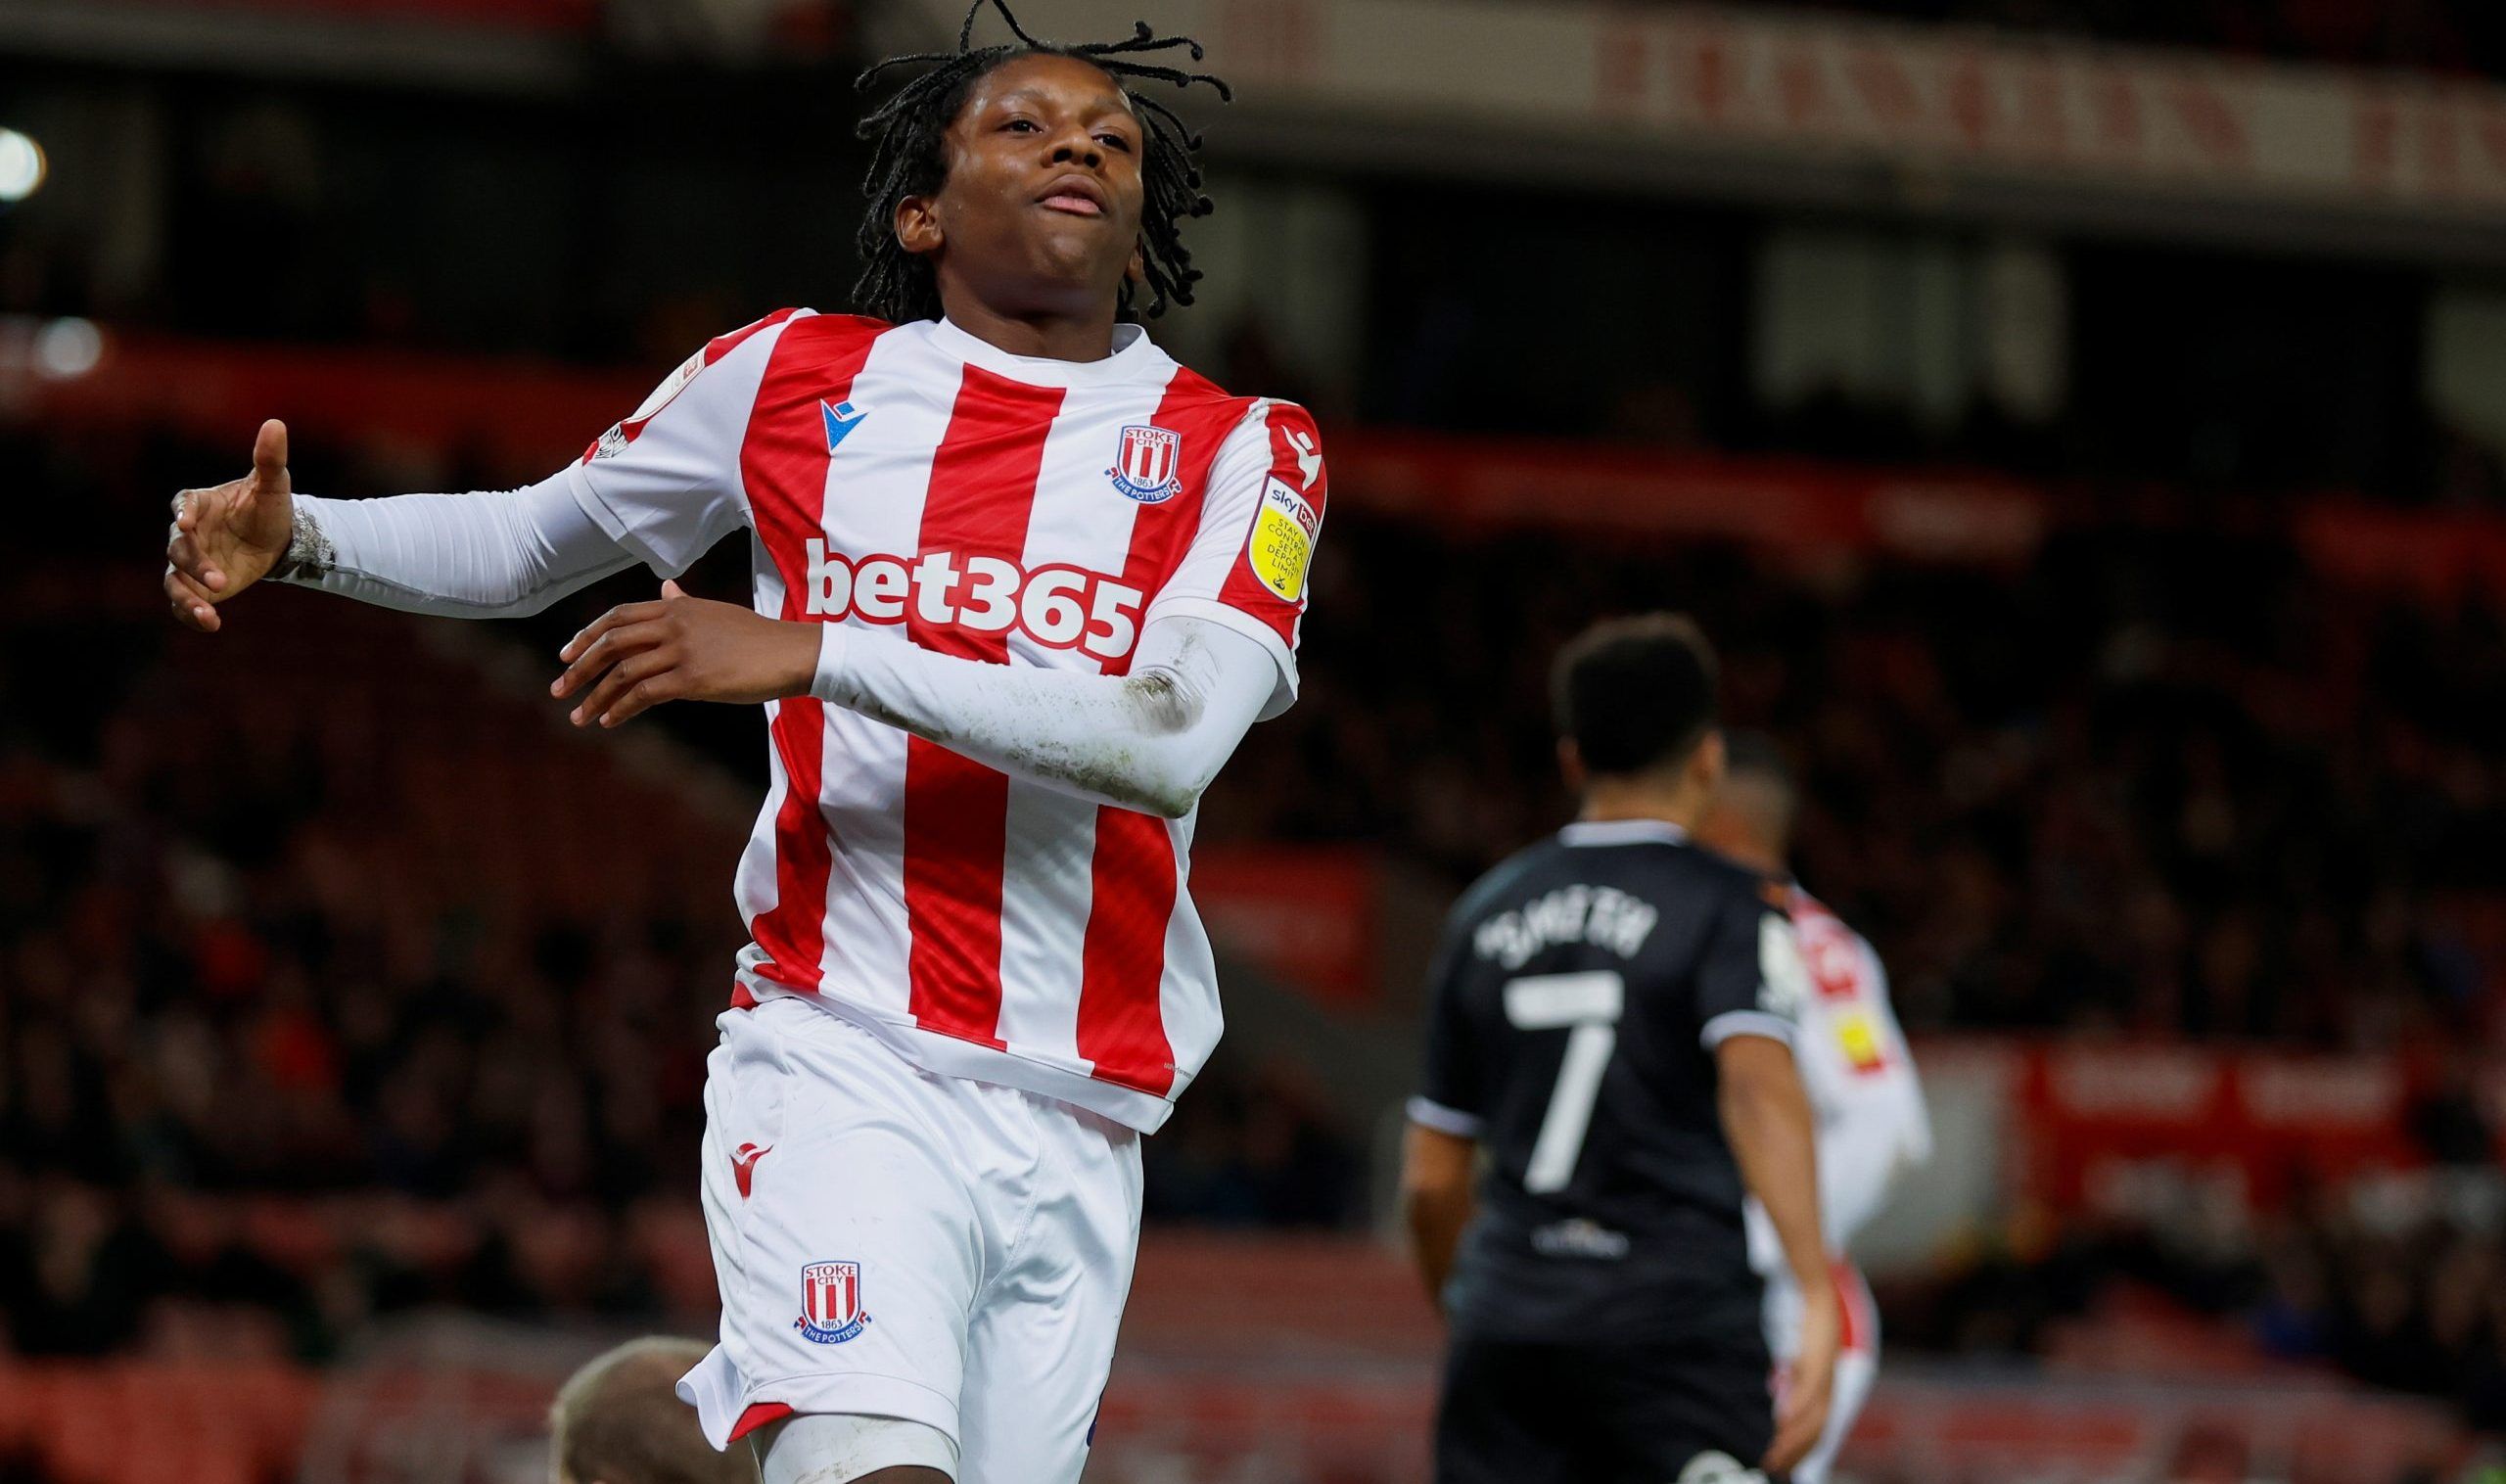 Soccer Football - Championship - Stoke City v Swansea City - bet365 Stadium, Stoke-on-Trent, Britain - February 8, 2022  Stoke City's Jaden Philogene-Bidace reacts  Action Images/Jason Cairnduff  EDITORIAL USE ONLY. No use with unauthorized audio, video, data, fixture lists, club/league logos or 